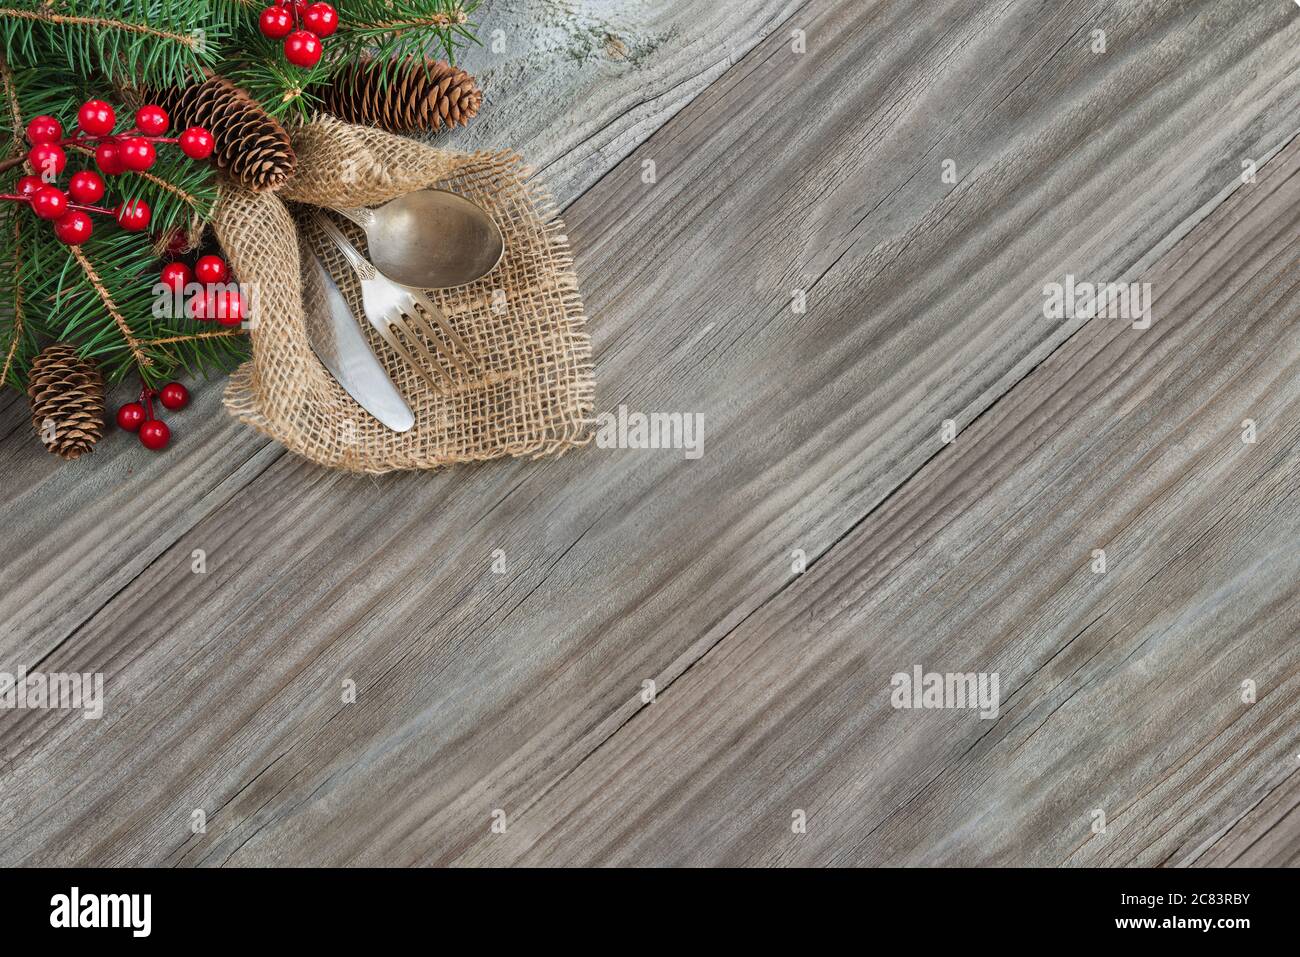 Christmas table with Christmas decoration: old knife, spoon and fork lie on the sacking napkin, as well as red holly berries and green spruce branch, Stock Photo